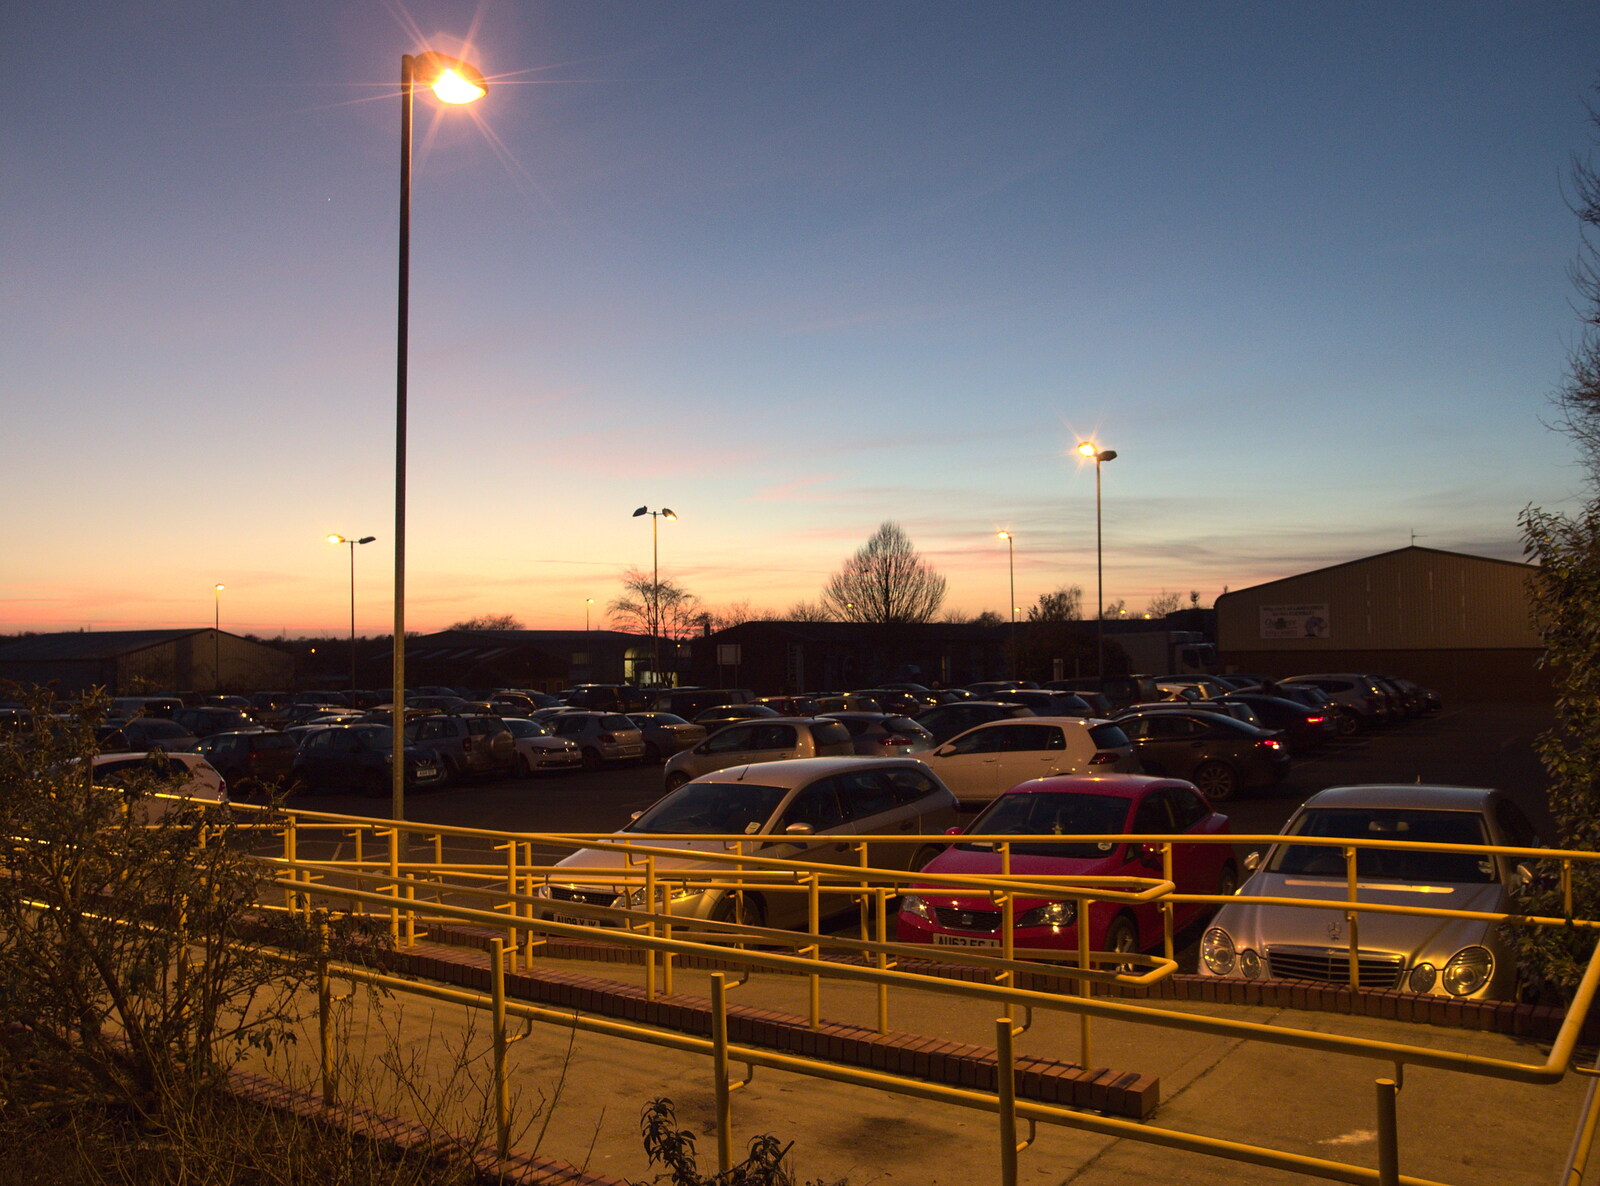 Sunset of the car park at Diss station from Fred and the Volcano, Brome, Suffolk - 8th February 2015